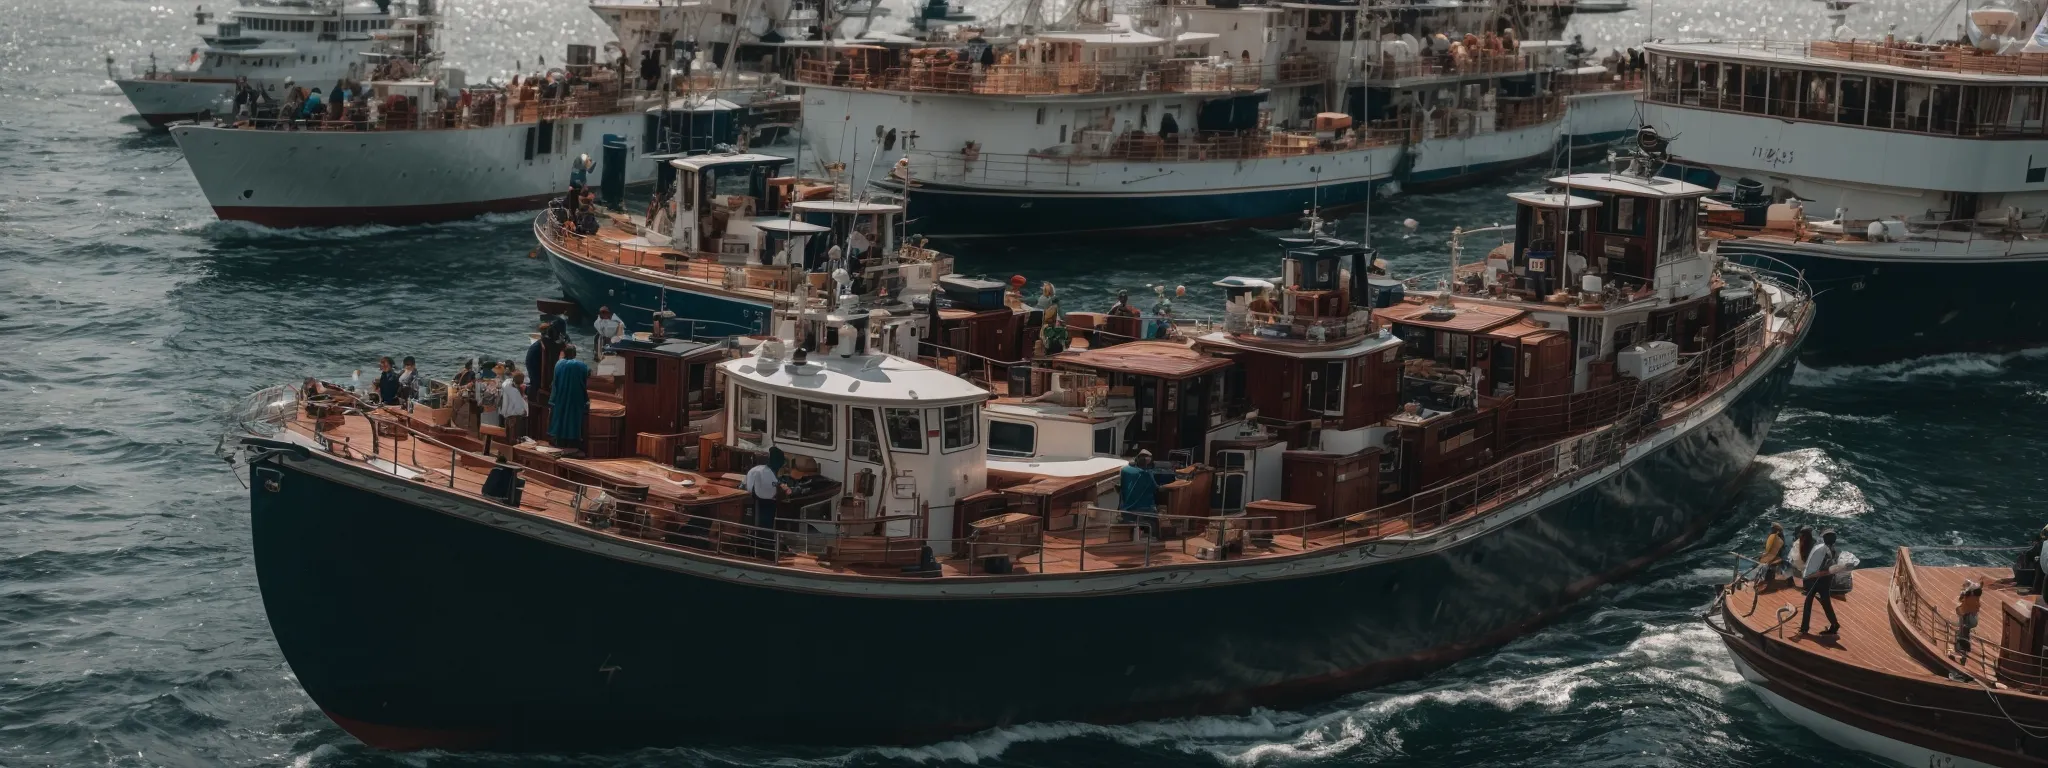 a group of small boats hitching a ride on a large ship, symbolizing small businesses leveraging a larger platform for visibility.